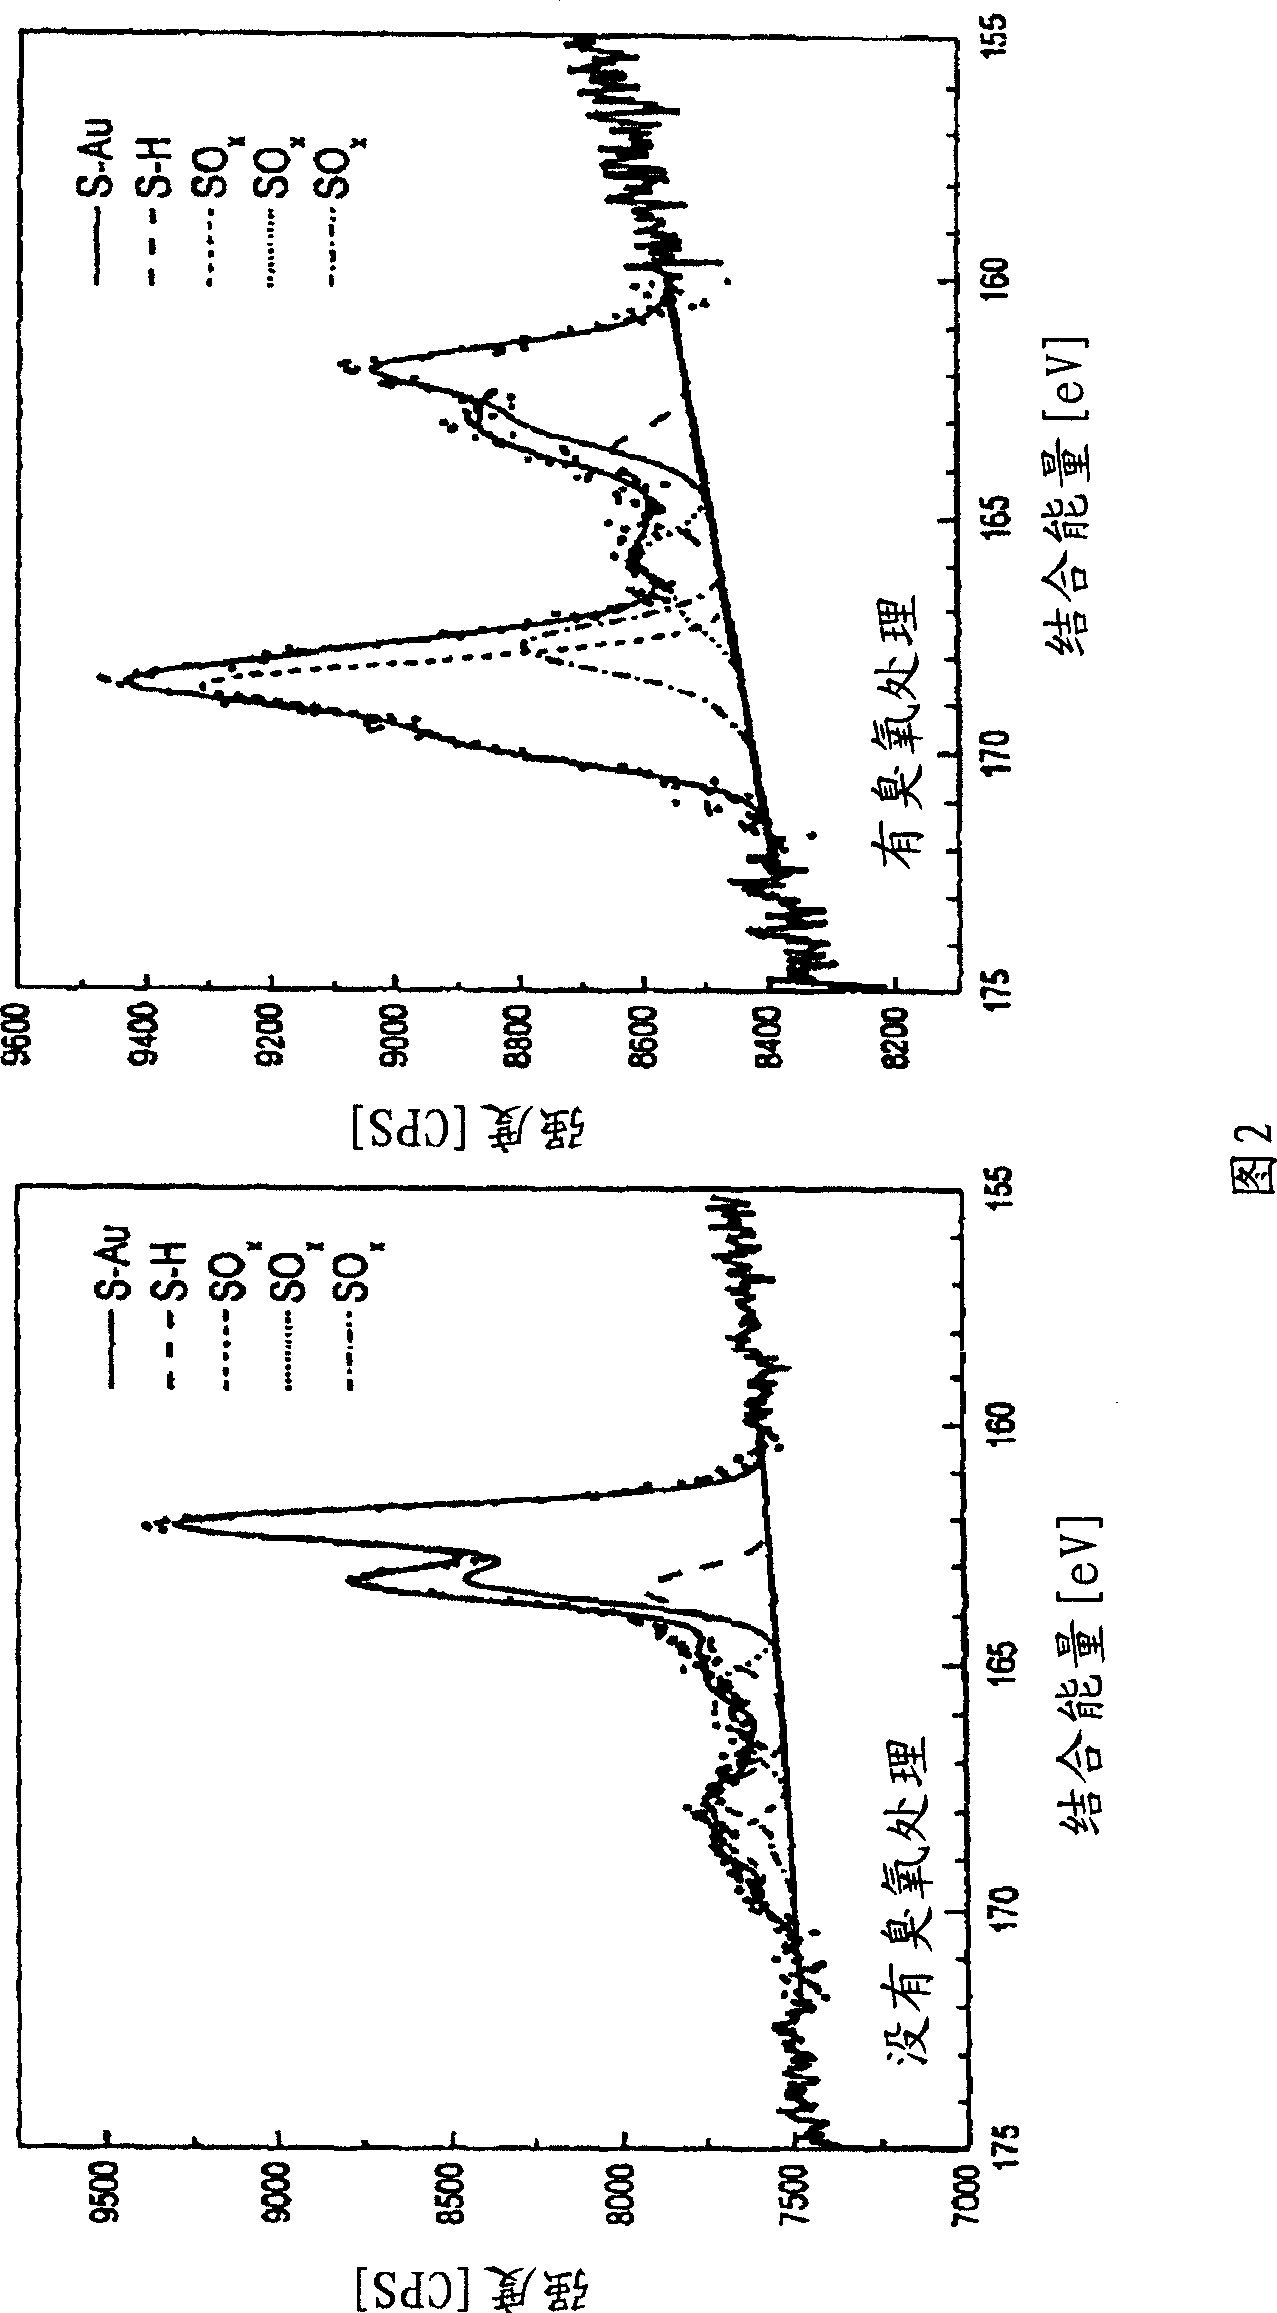 A method of altering the sensitivity and/or selectivity of a chemiresistor sensor array